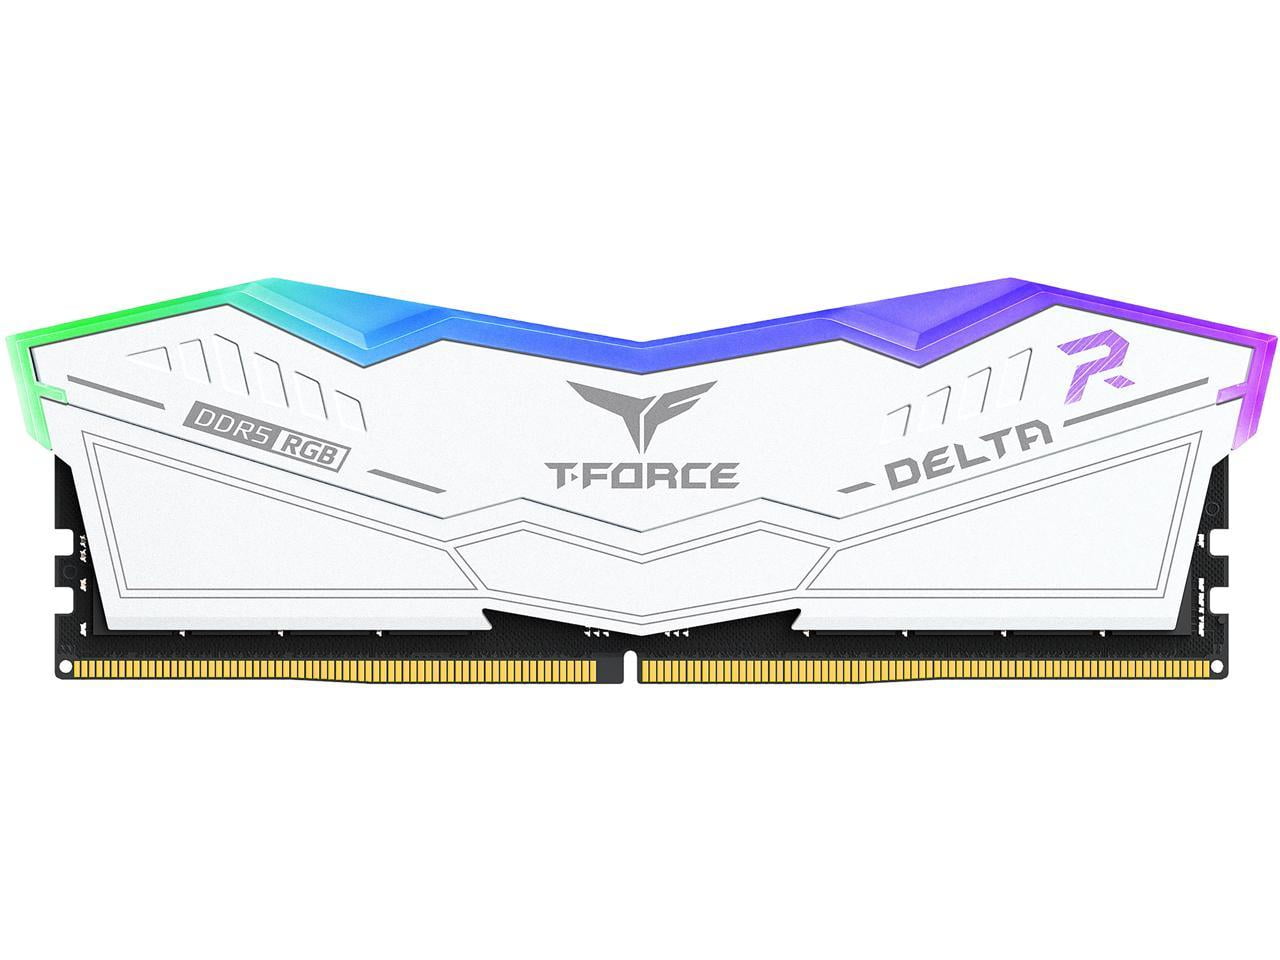 8gb team group t force delta. 8gb Team Group t-Force Delta RGB 5200mhz. Team Group t-forse Delta RGB. Team Group ddr5 t-Force Delta RGB 48gb. Team Group ddr5 5600.